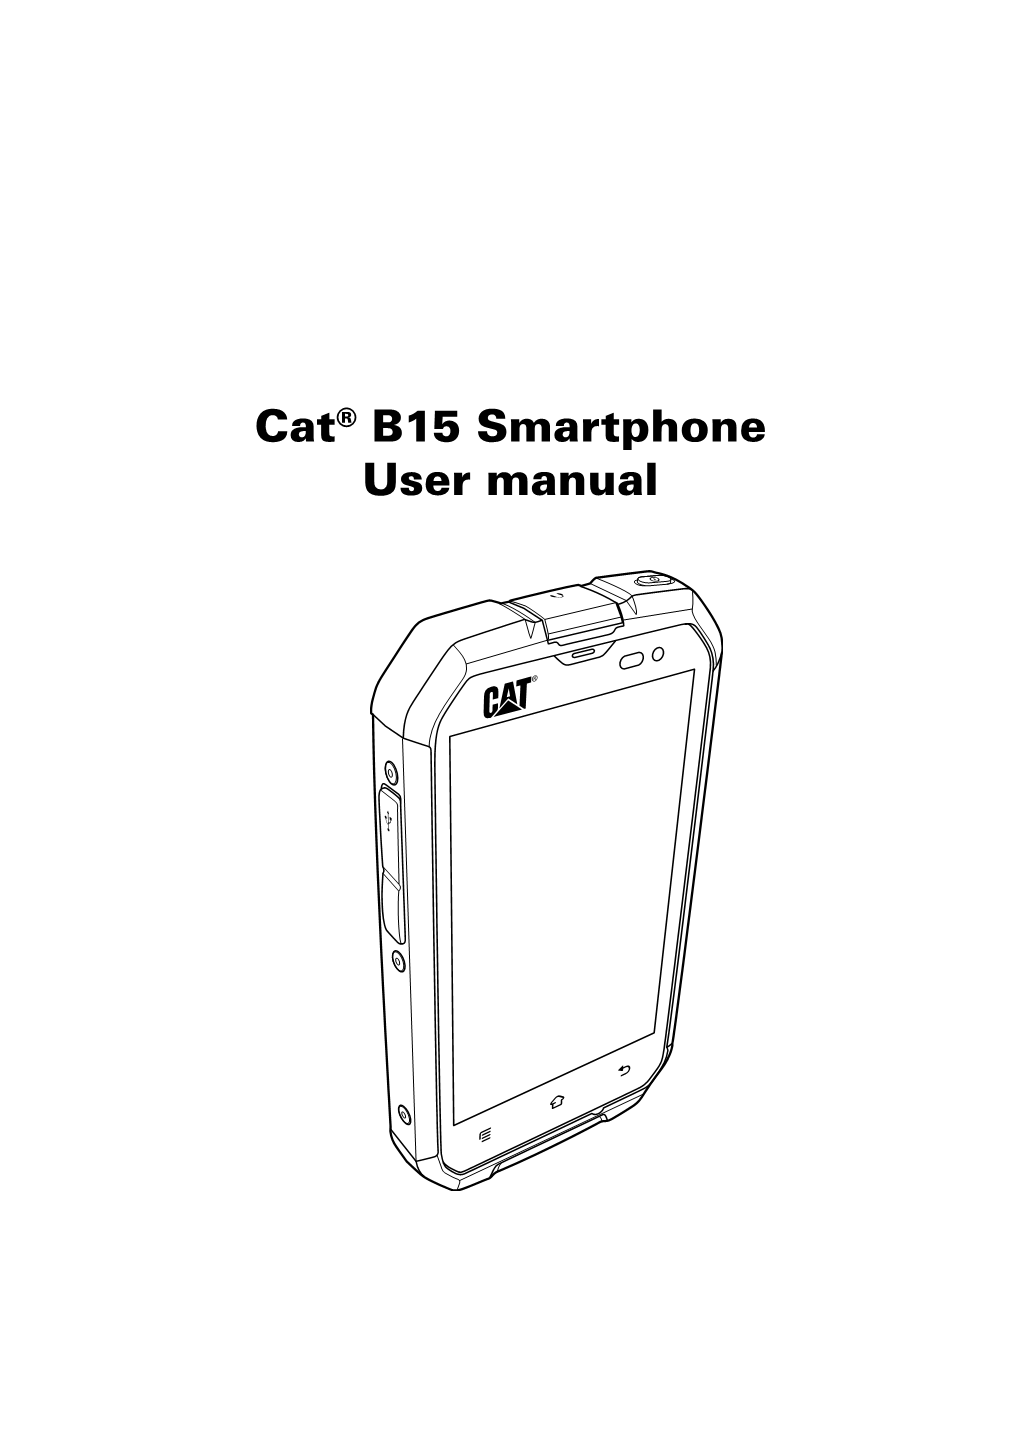 Cat® B15 Smartphone User Manual Please Read Before Proceeding Safety Precautions